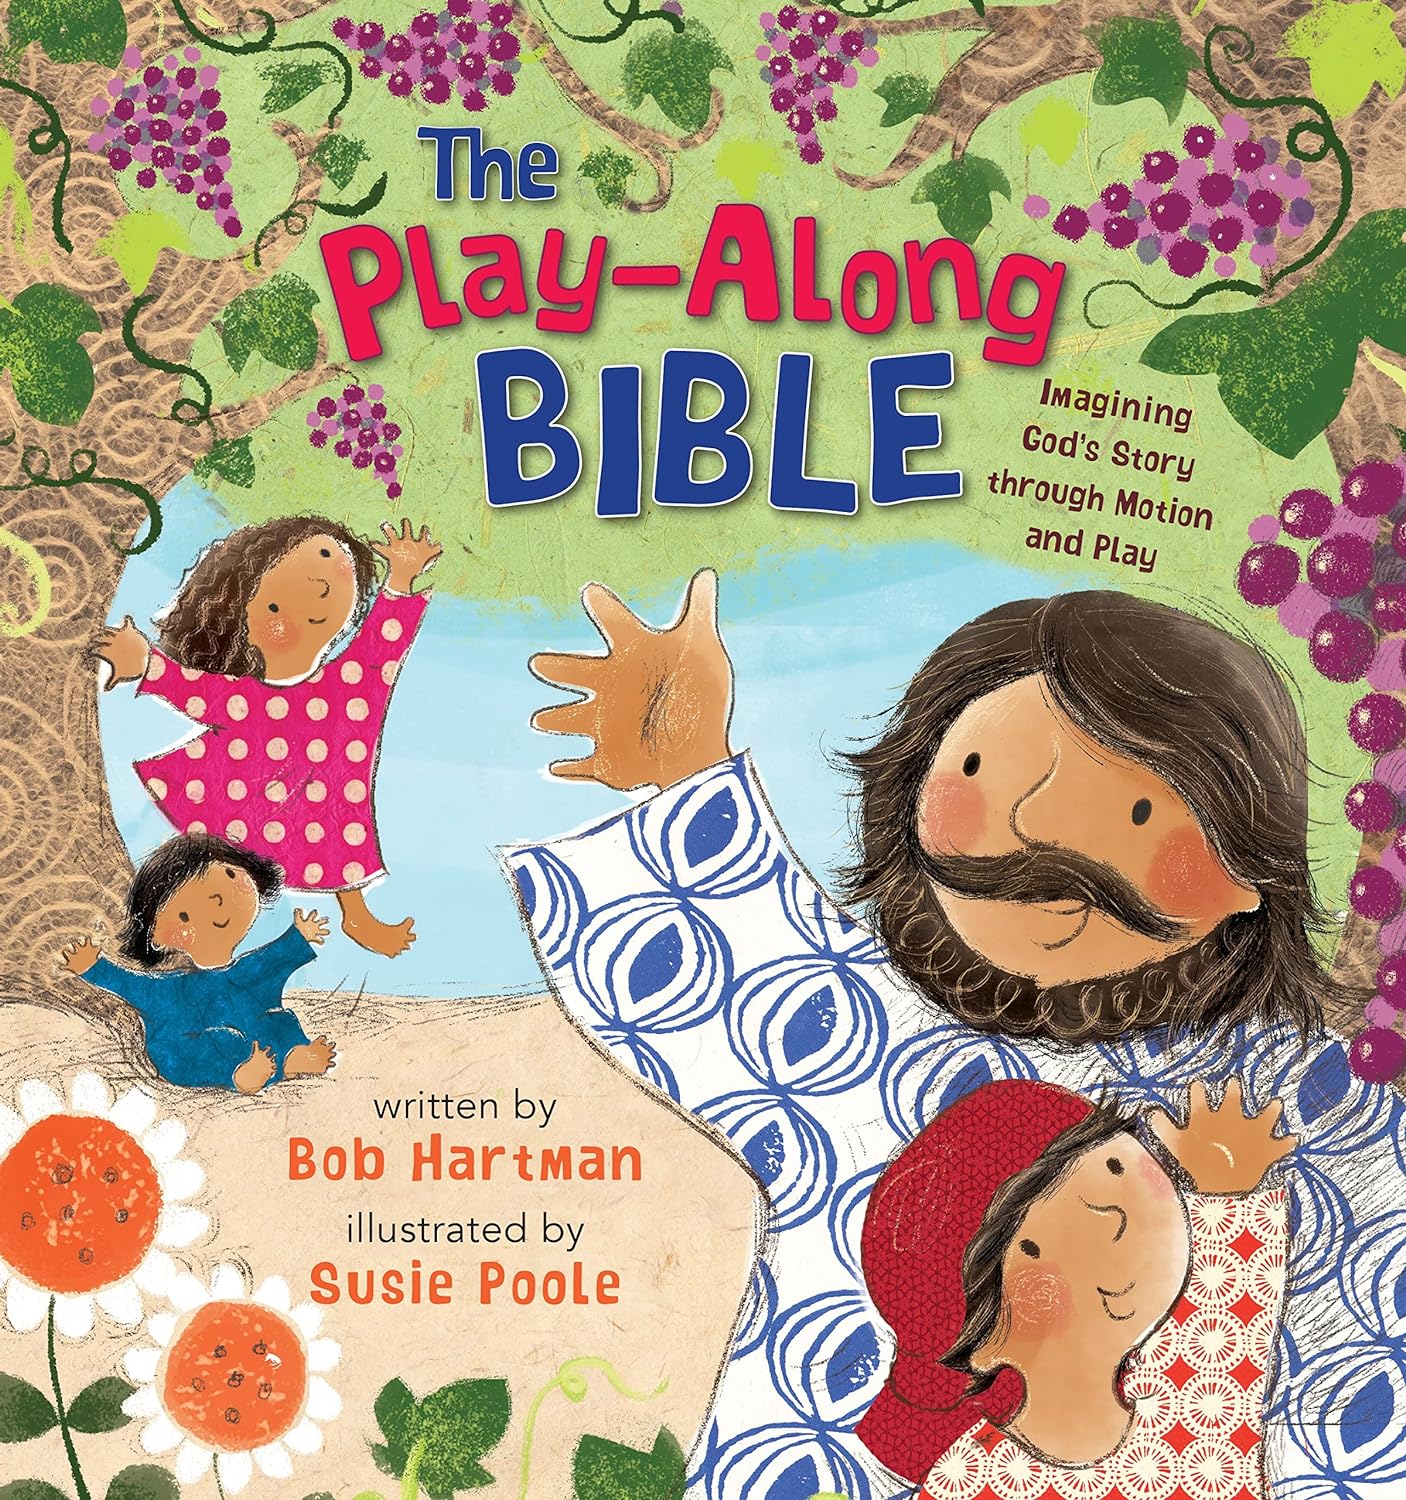 The Play-Along Bible: Imagining God's Story through Motion and Play